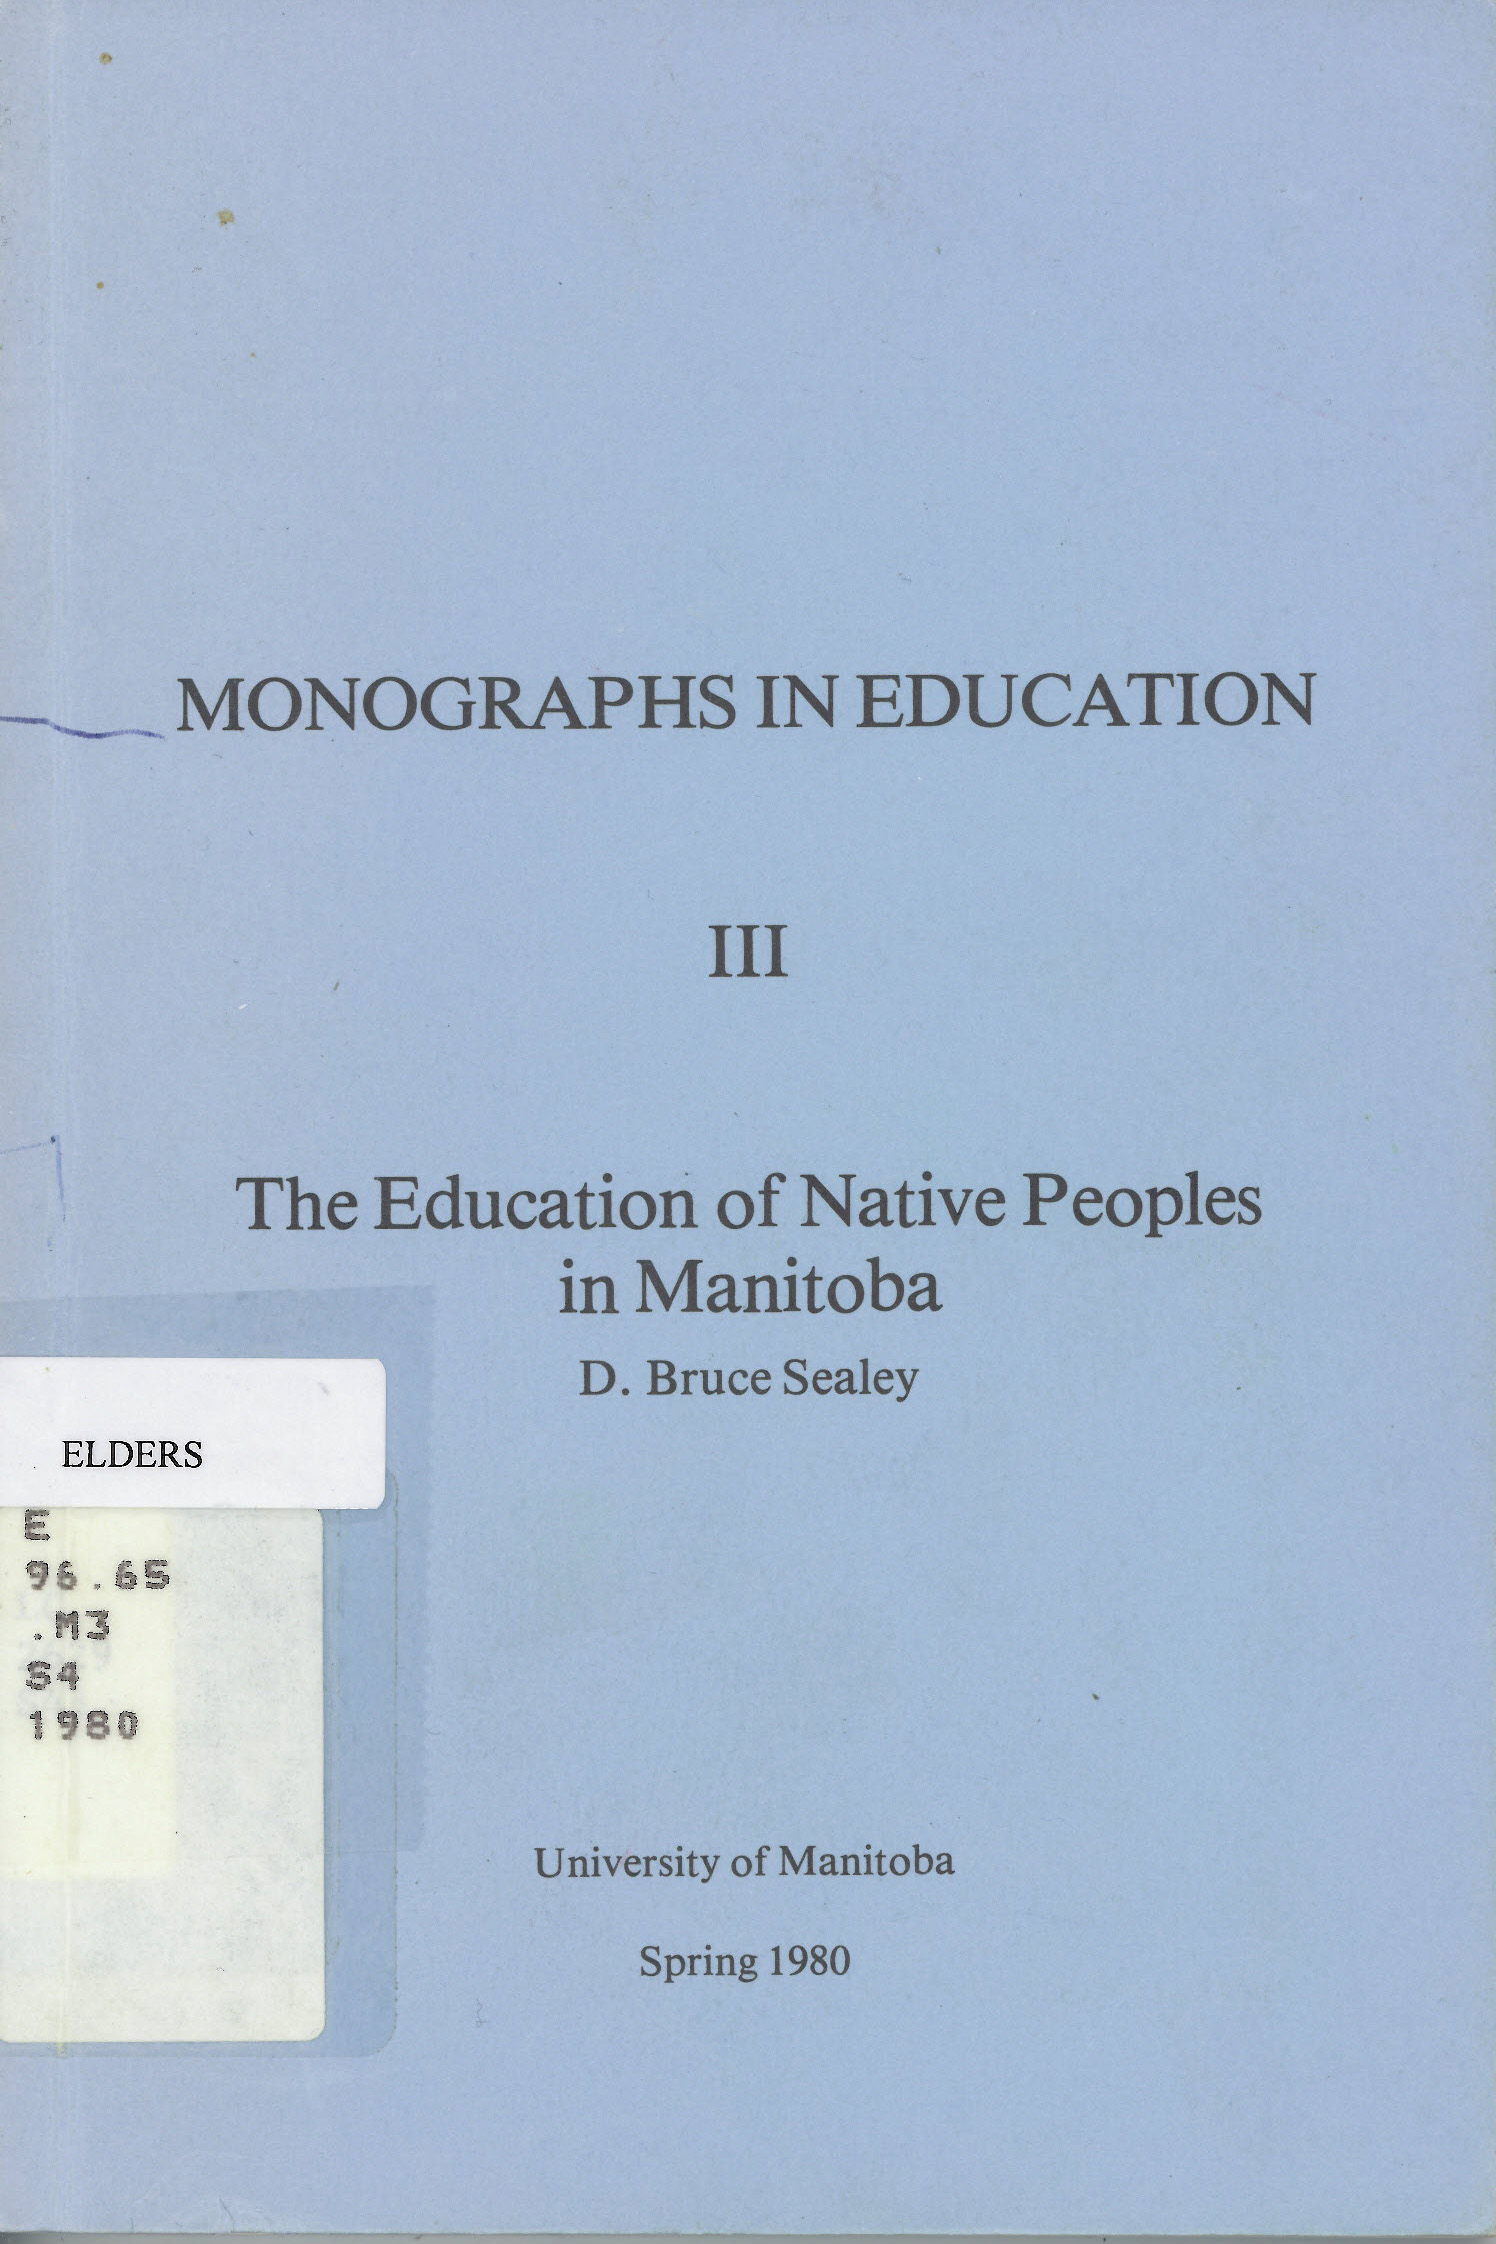 Education of native peoples in Manitoba